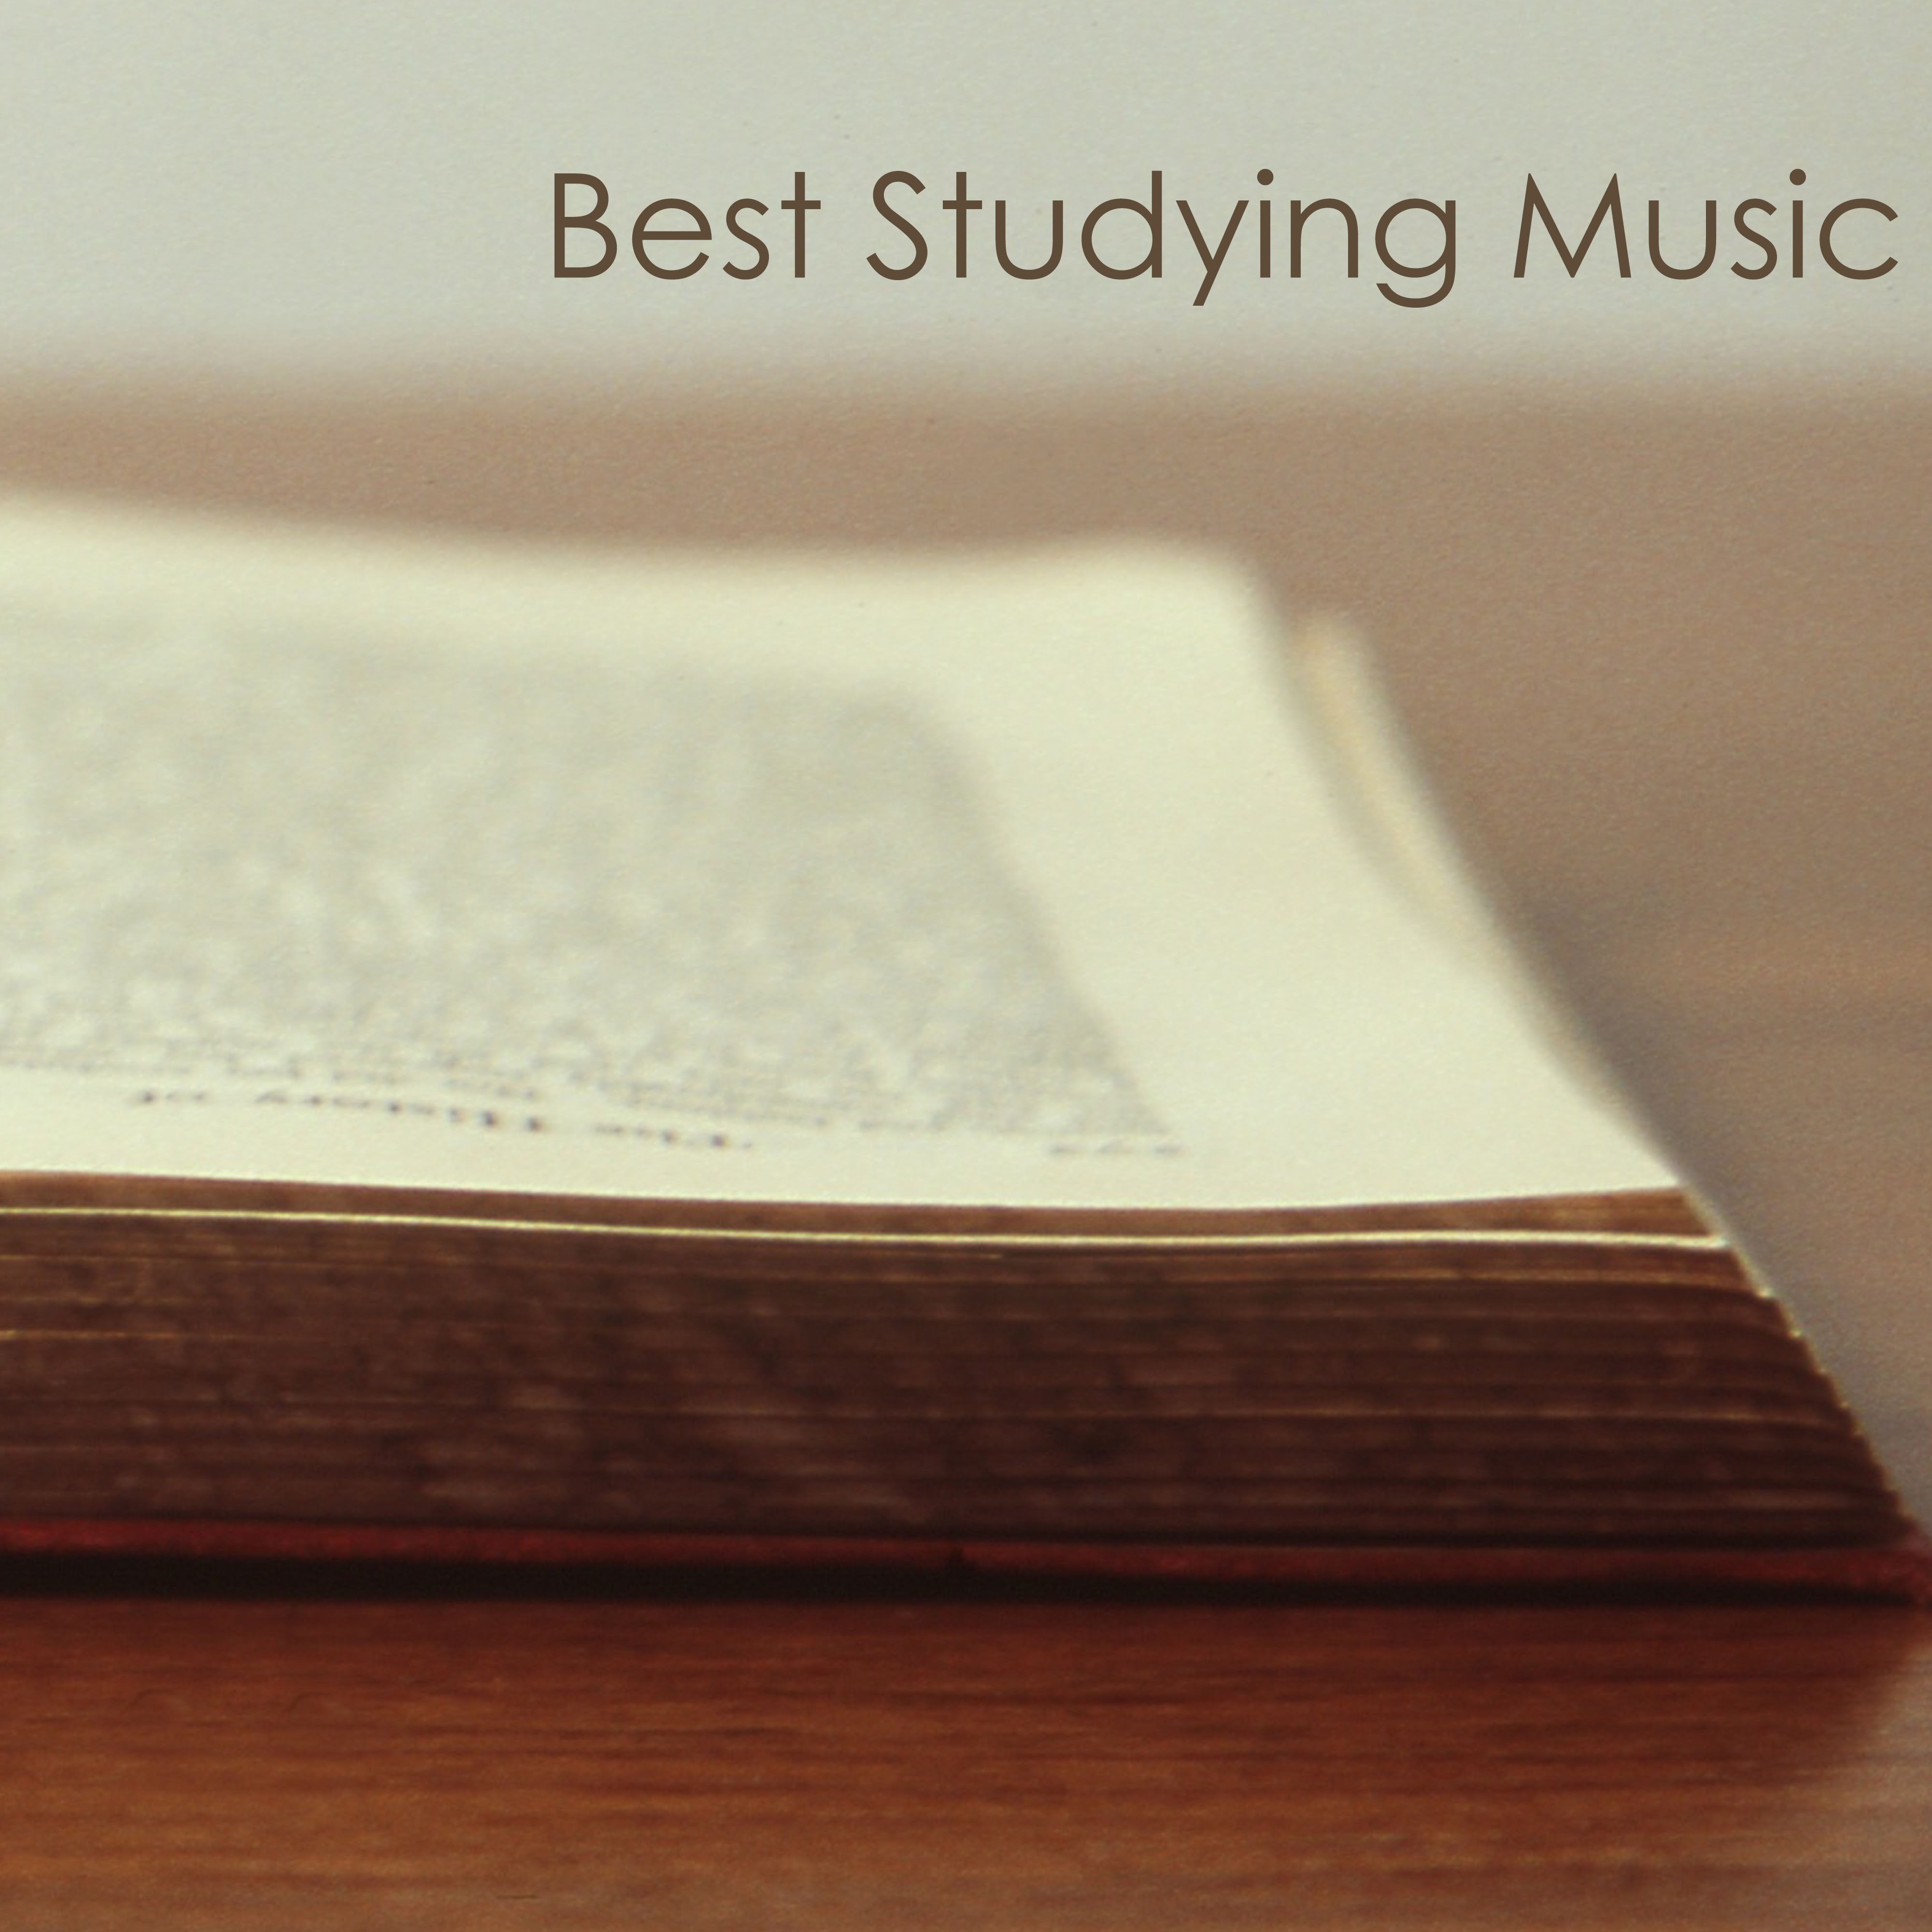 Calming Music for Different Studies